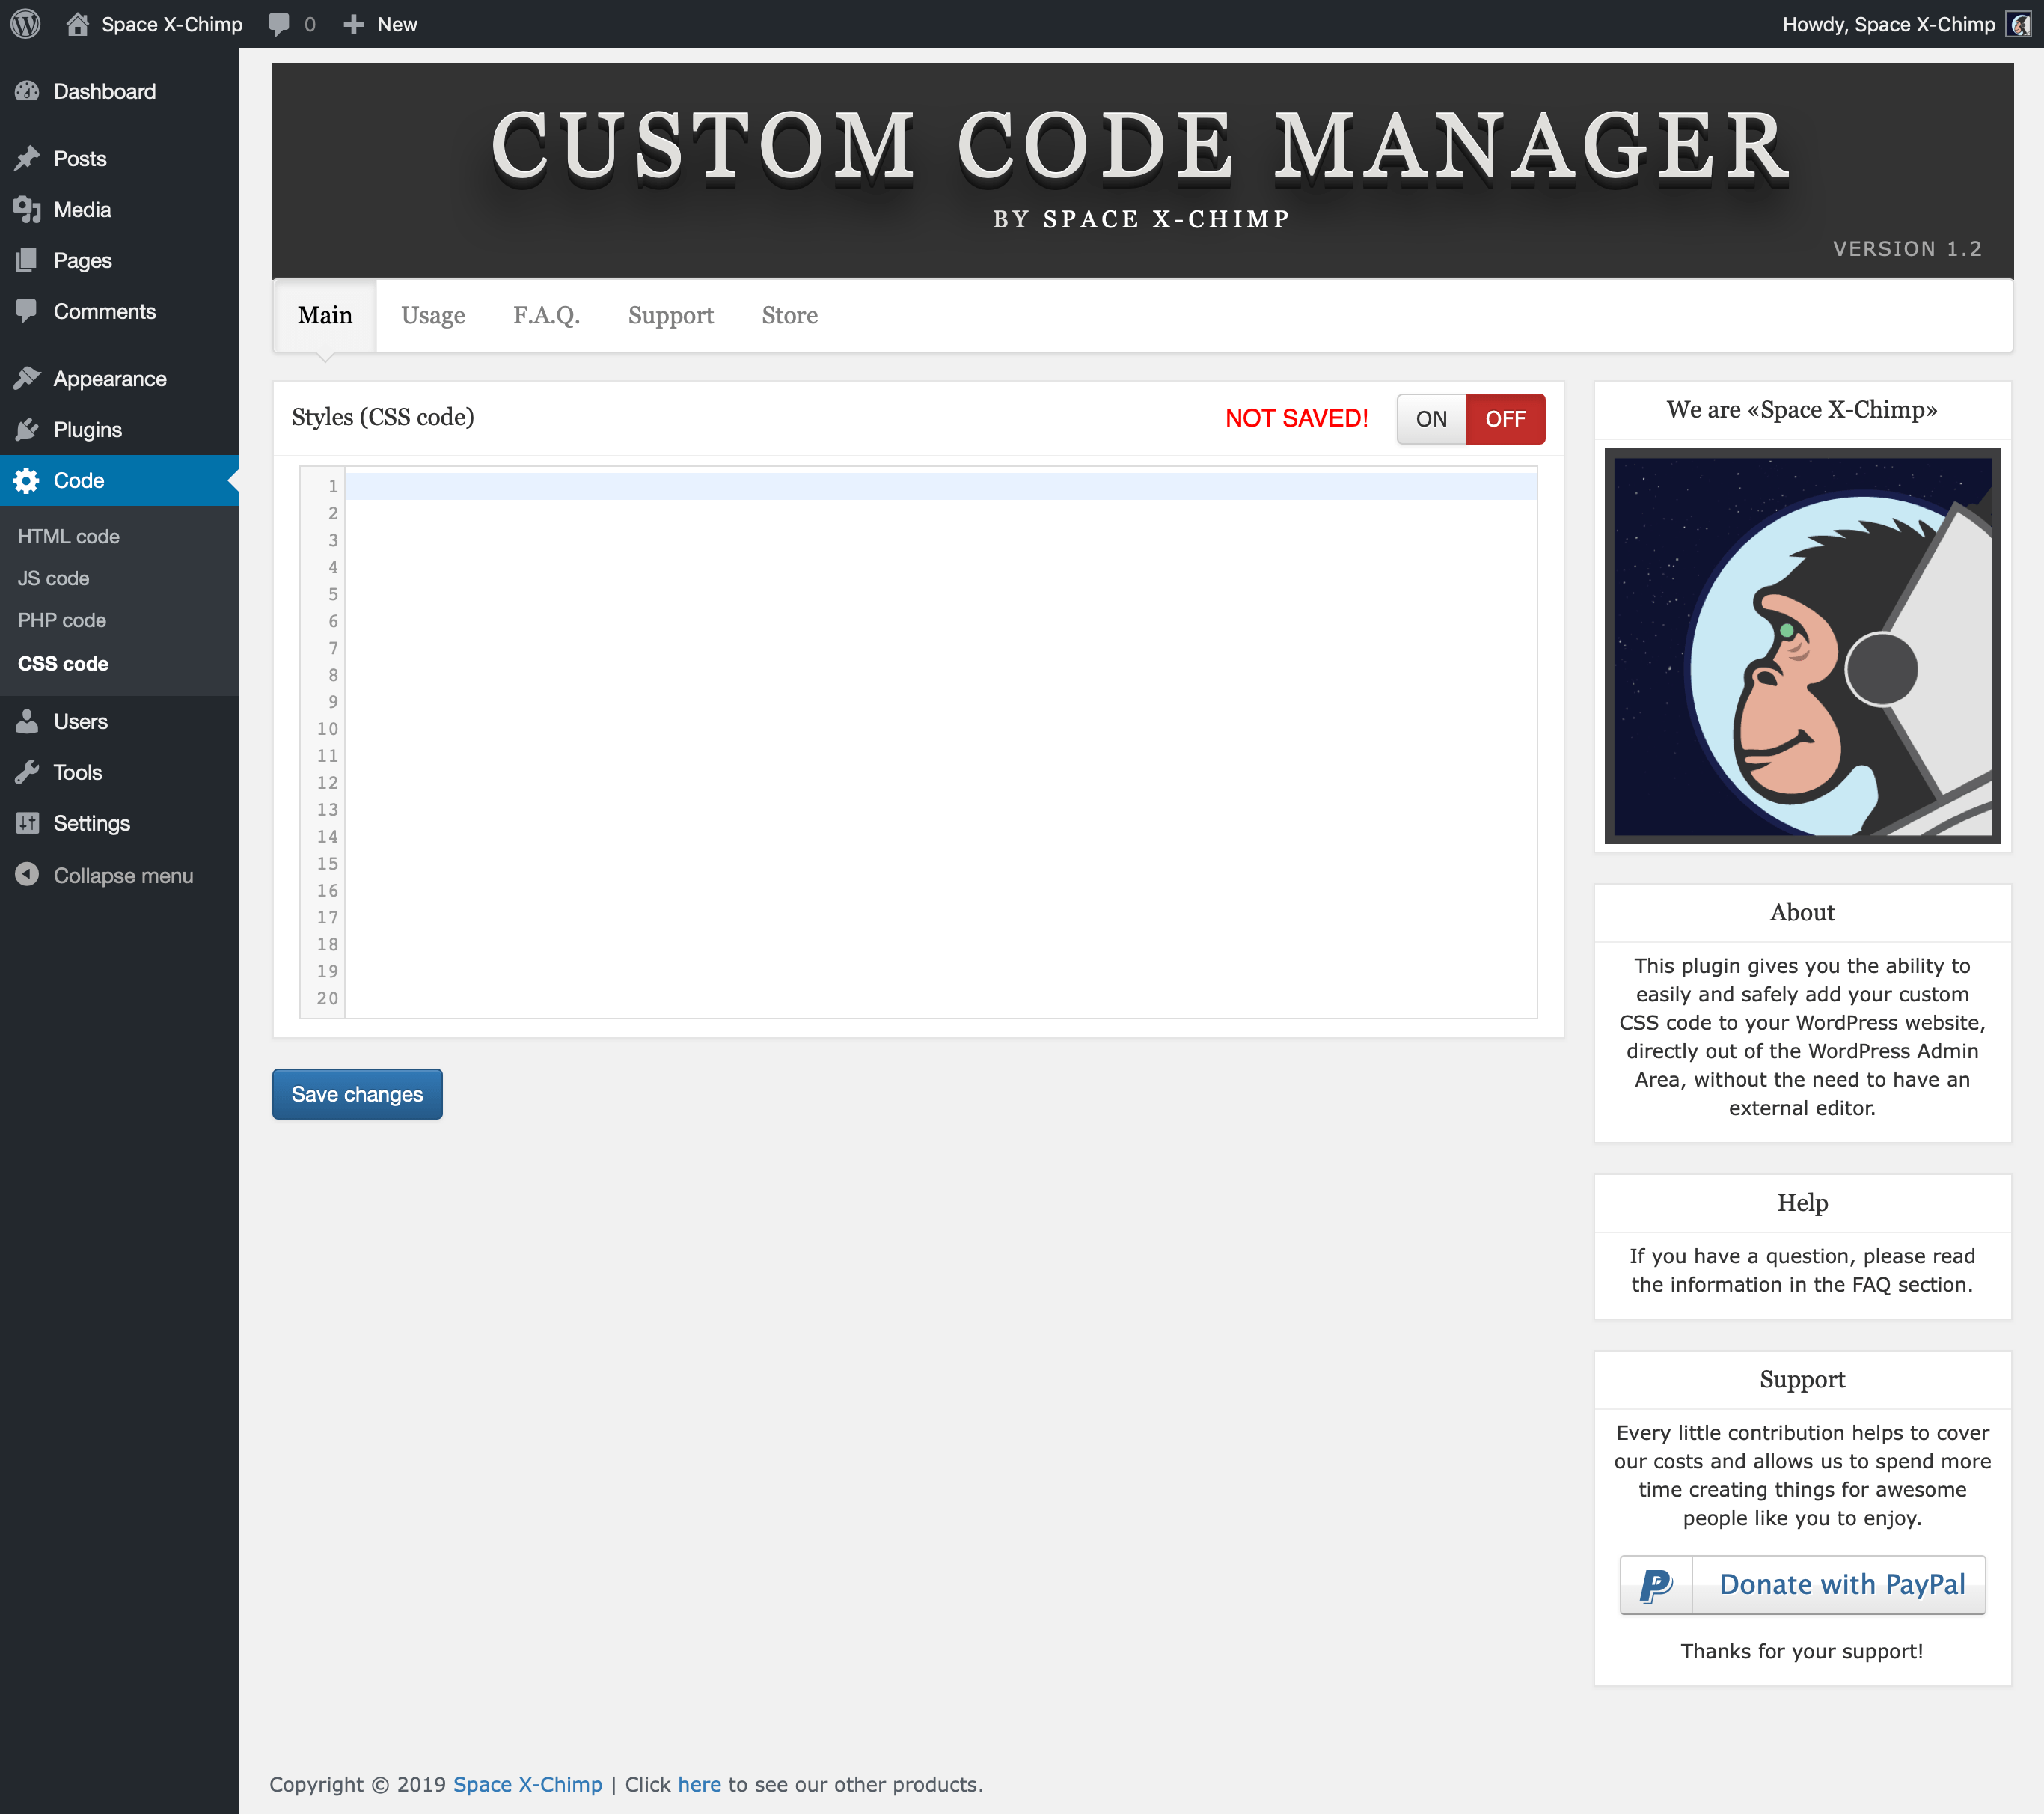 Plugin page with custom CSS code added.